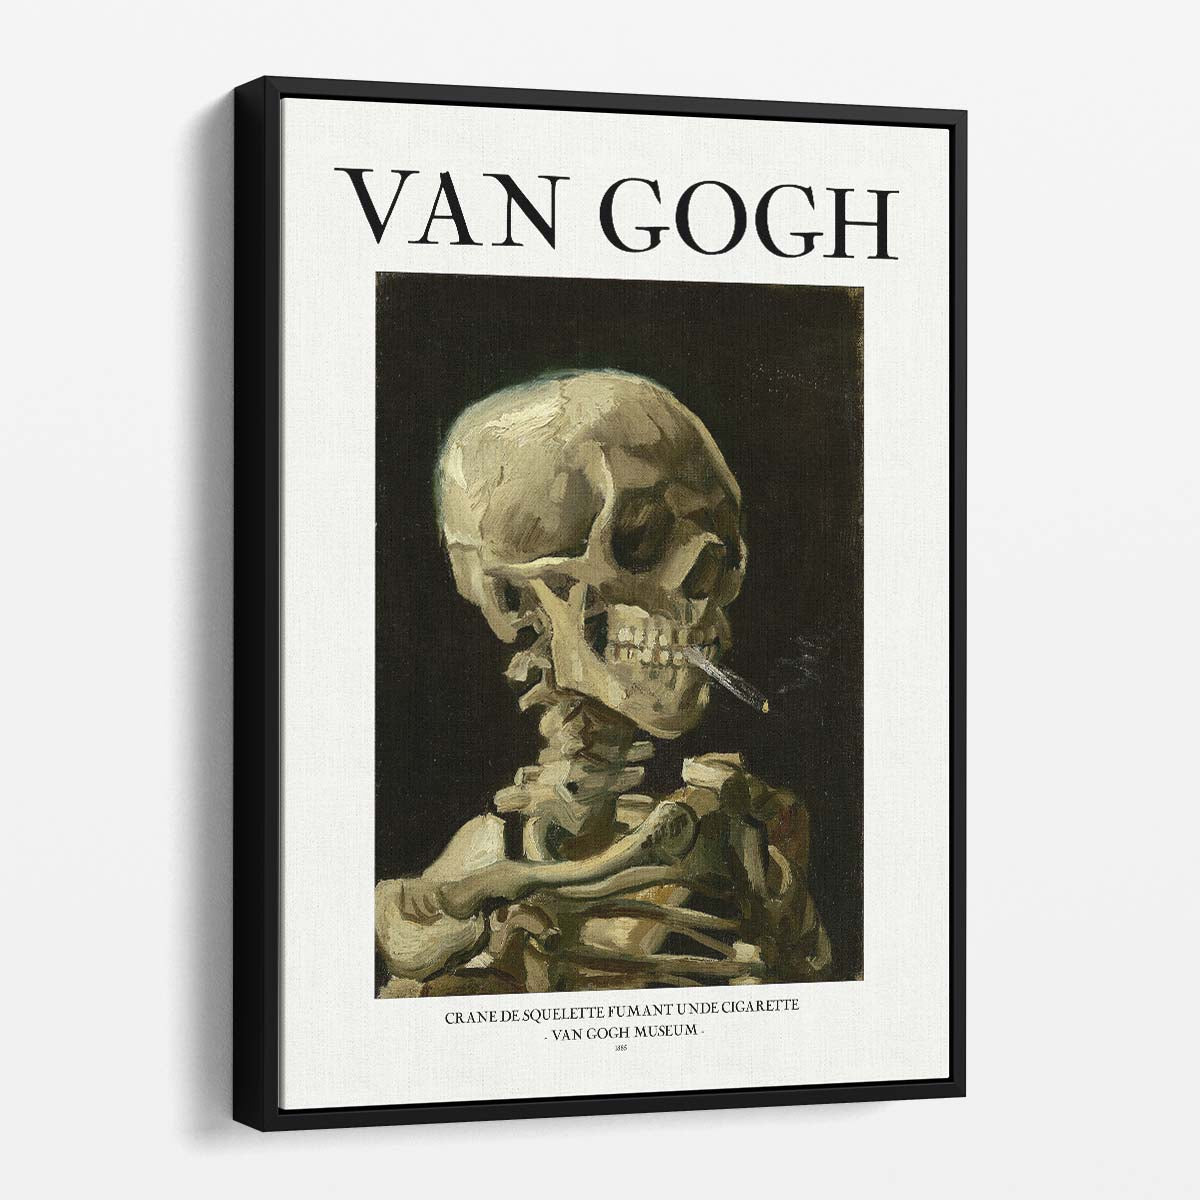 Van Gogh Skull Illustration, Smoking Skeleton Acrylic Painting Poster by Luxuriance Designs, made in USA